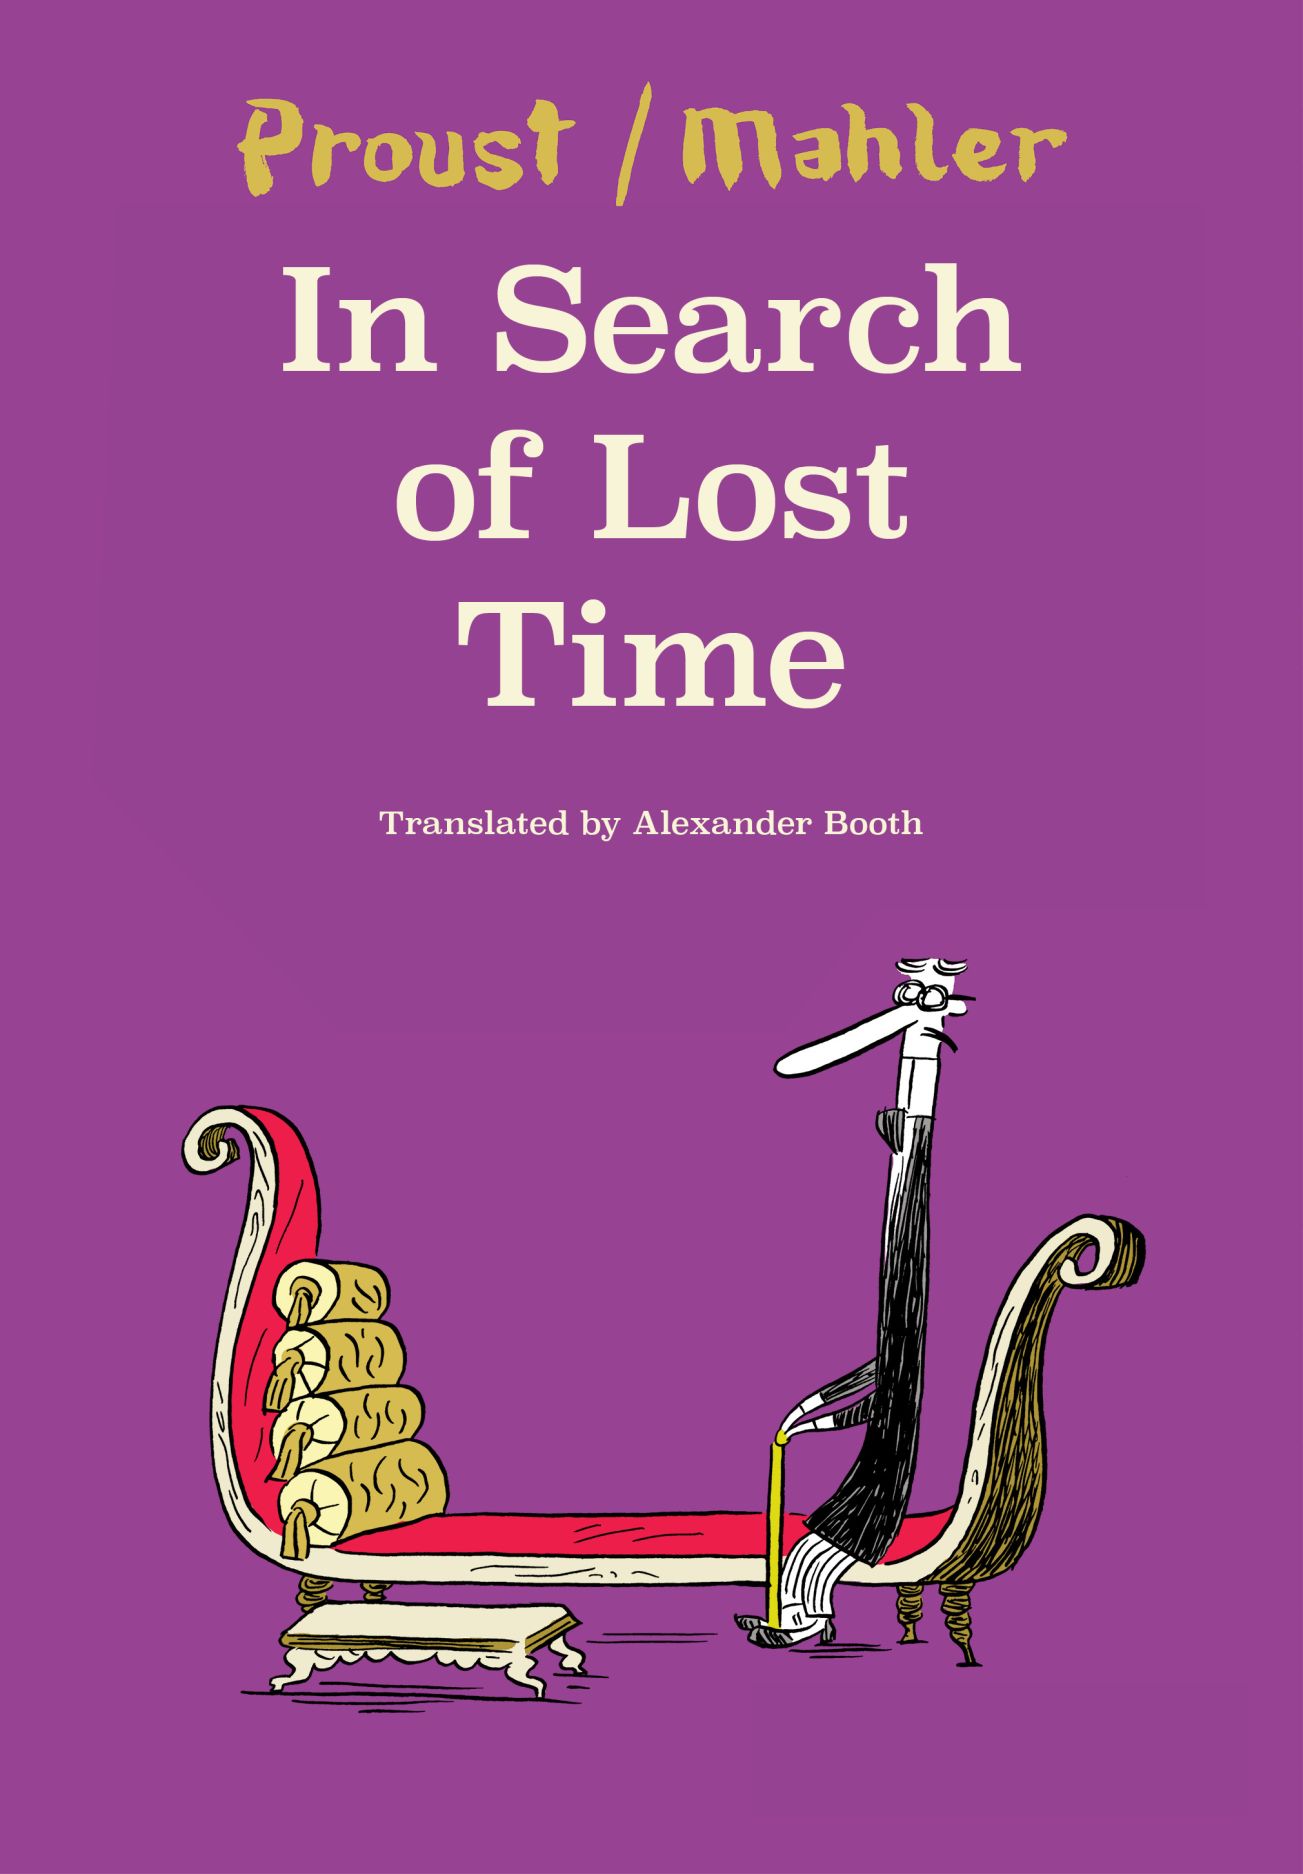 In Search of Lost Time: after Proust, Mahler, Booth